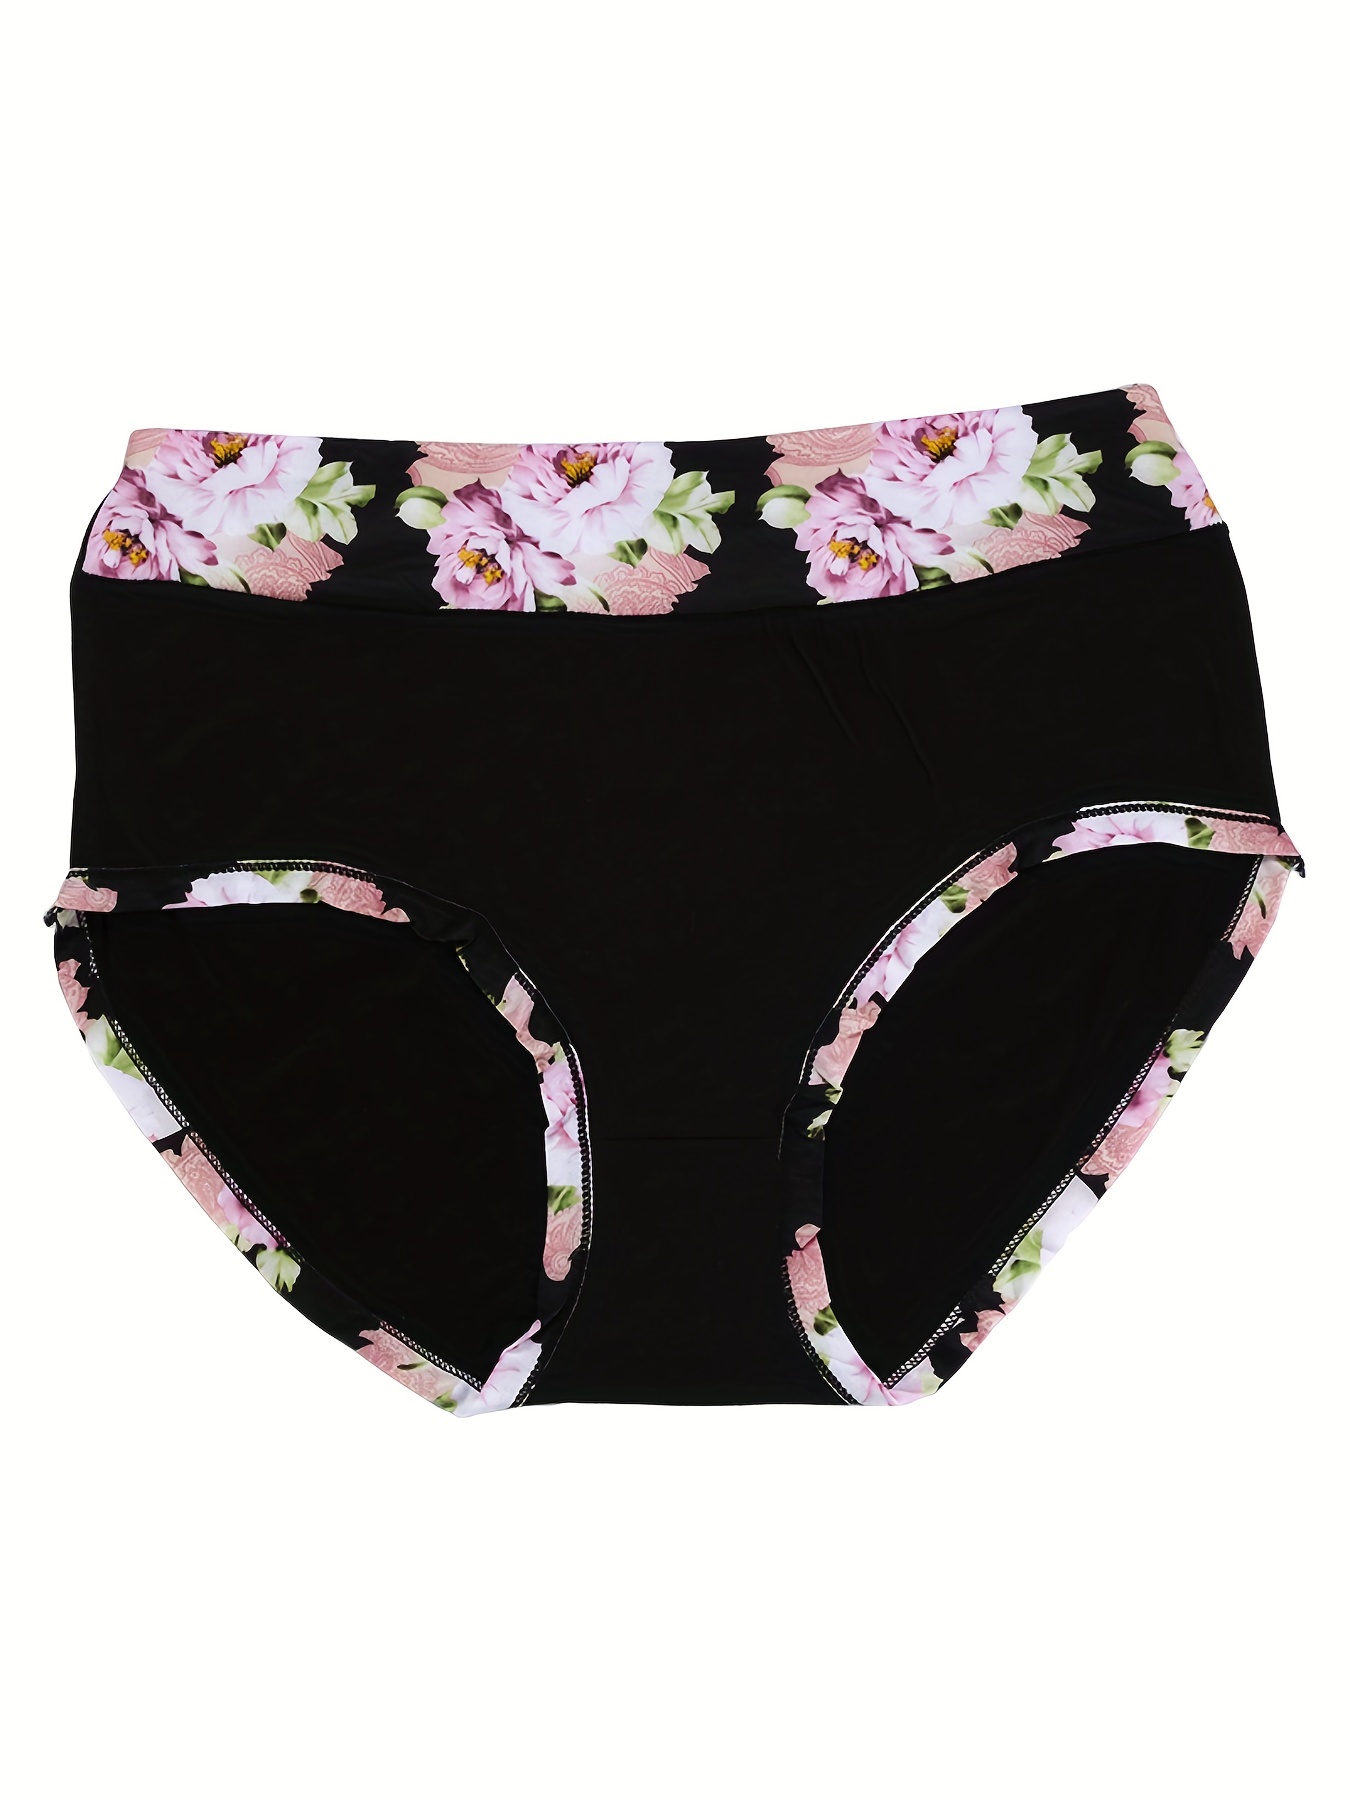 Women's Panties With Floral Print,Large Size Women's Underwear